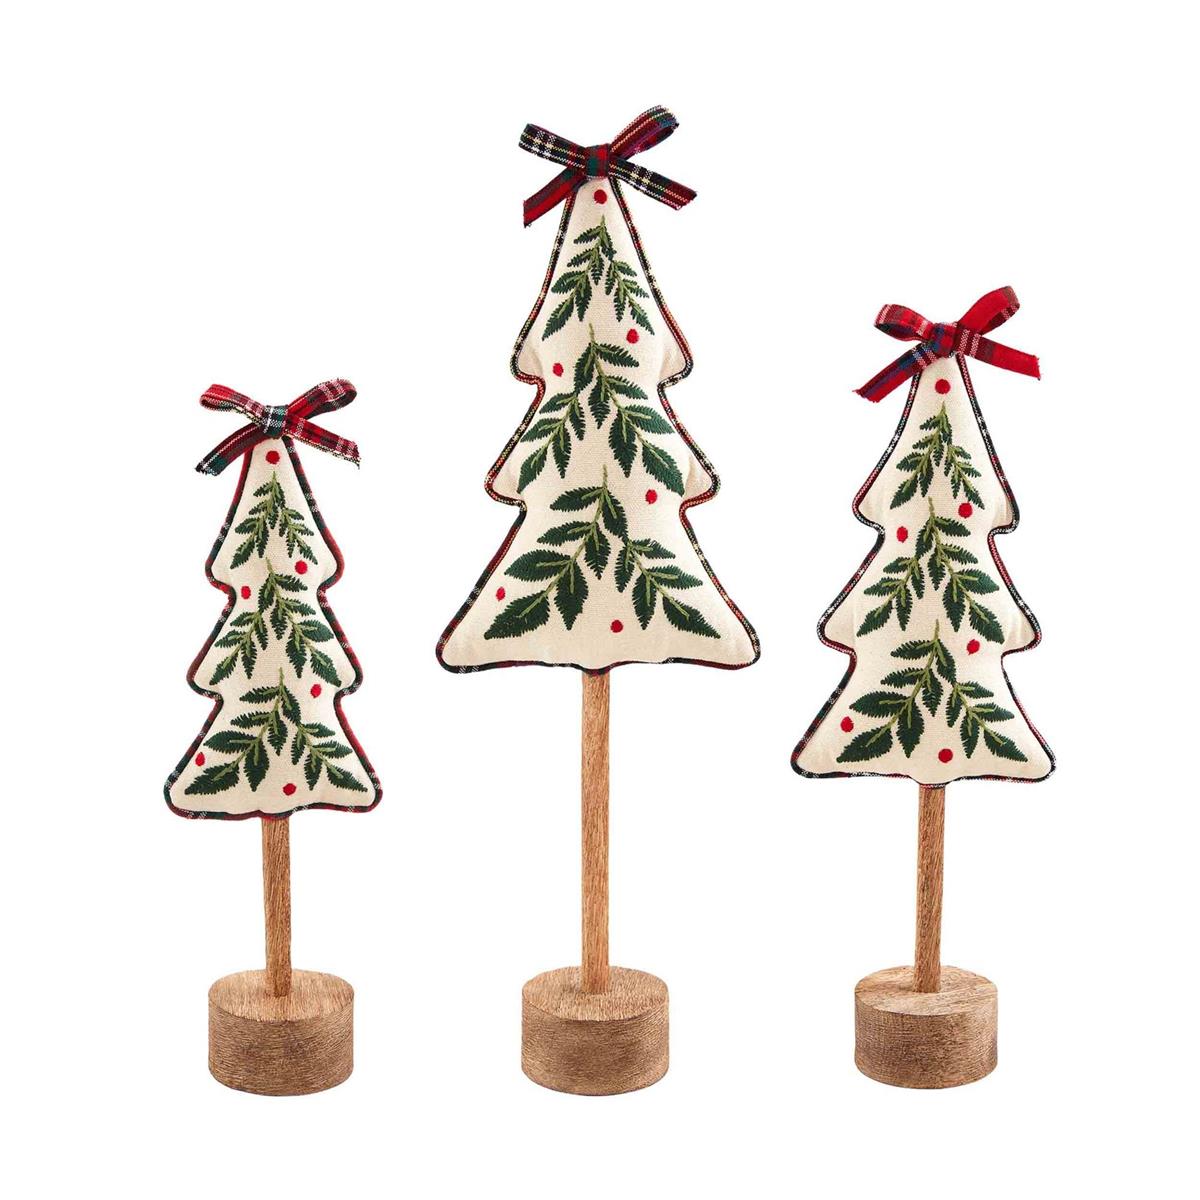 all three sizes of embroidered holly tree sitters displayed against a white background